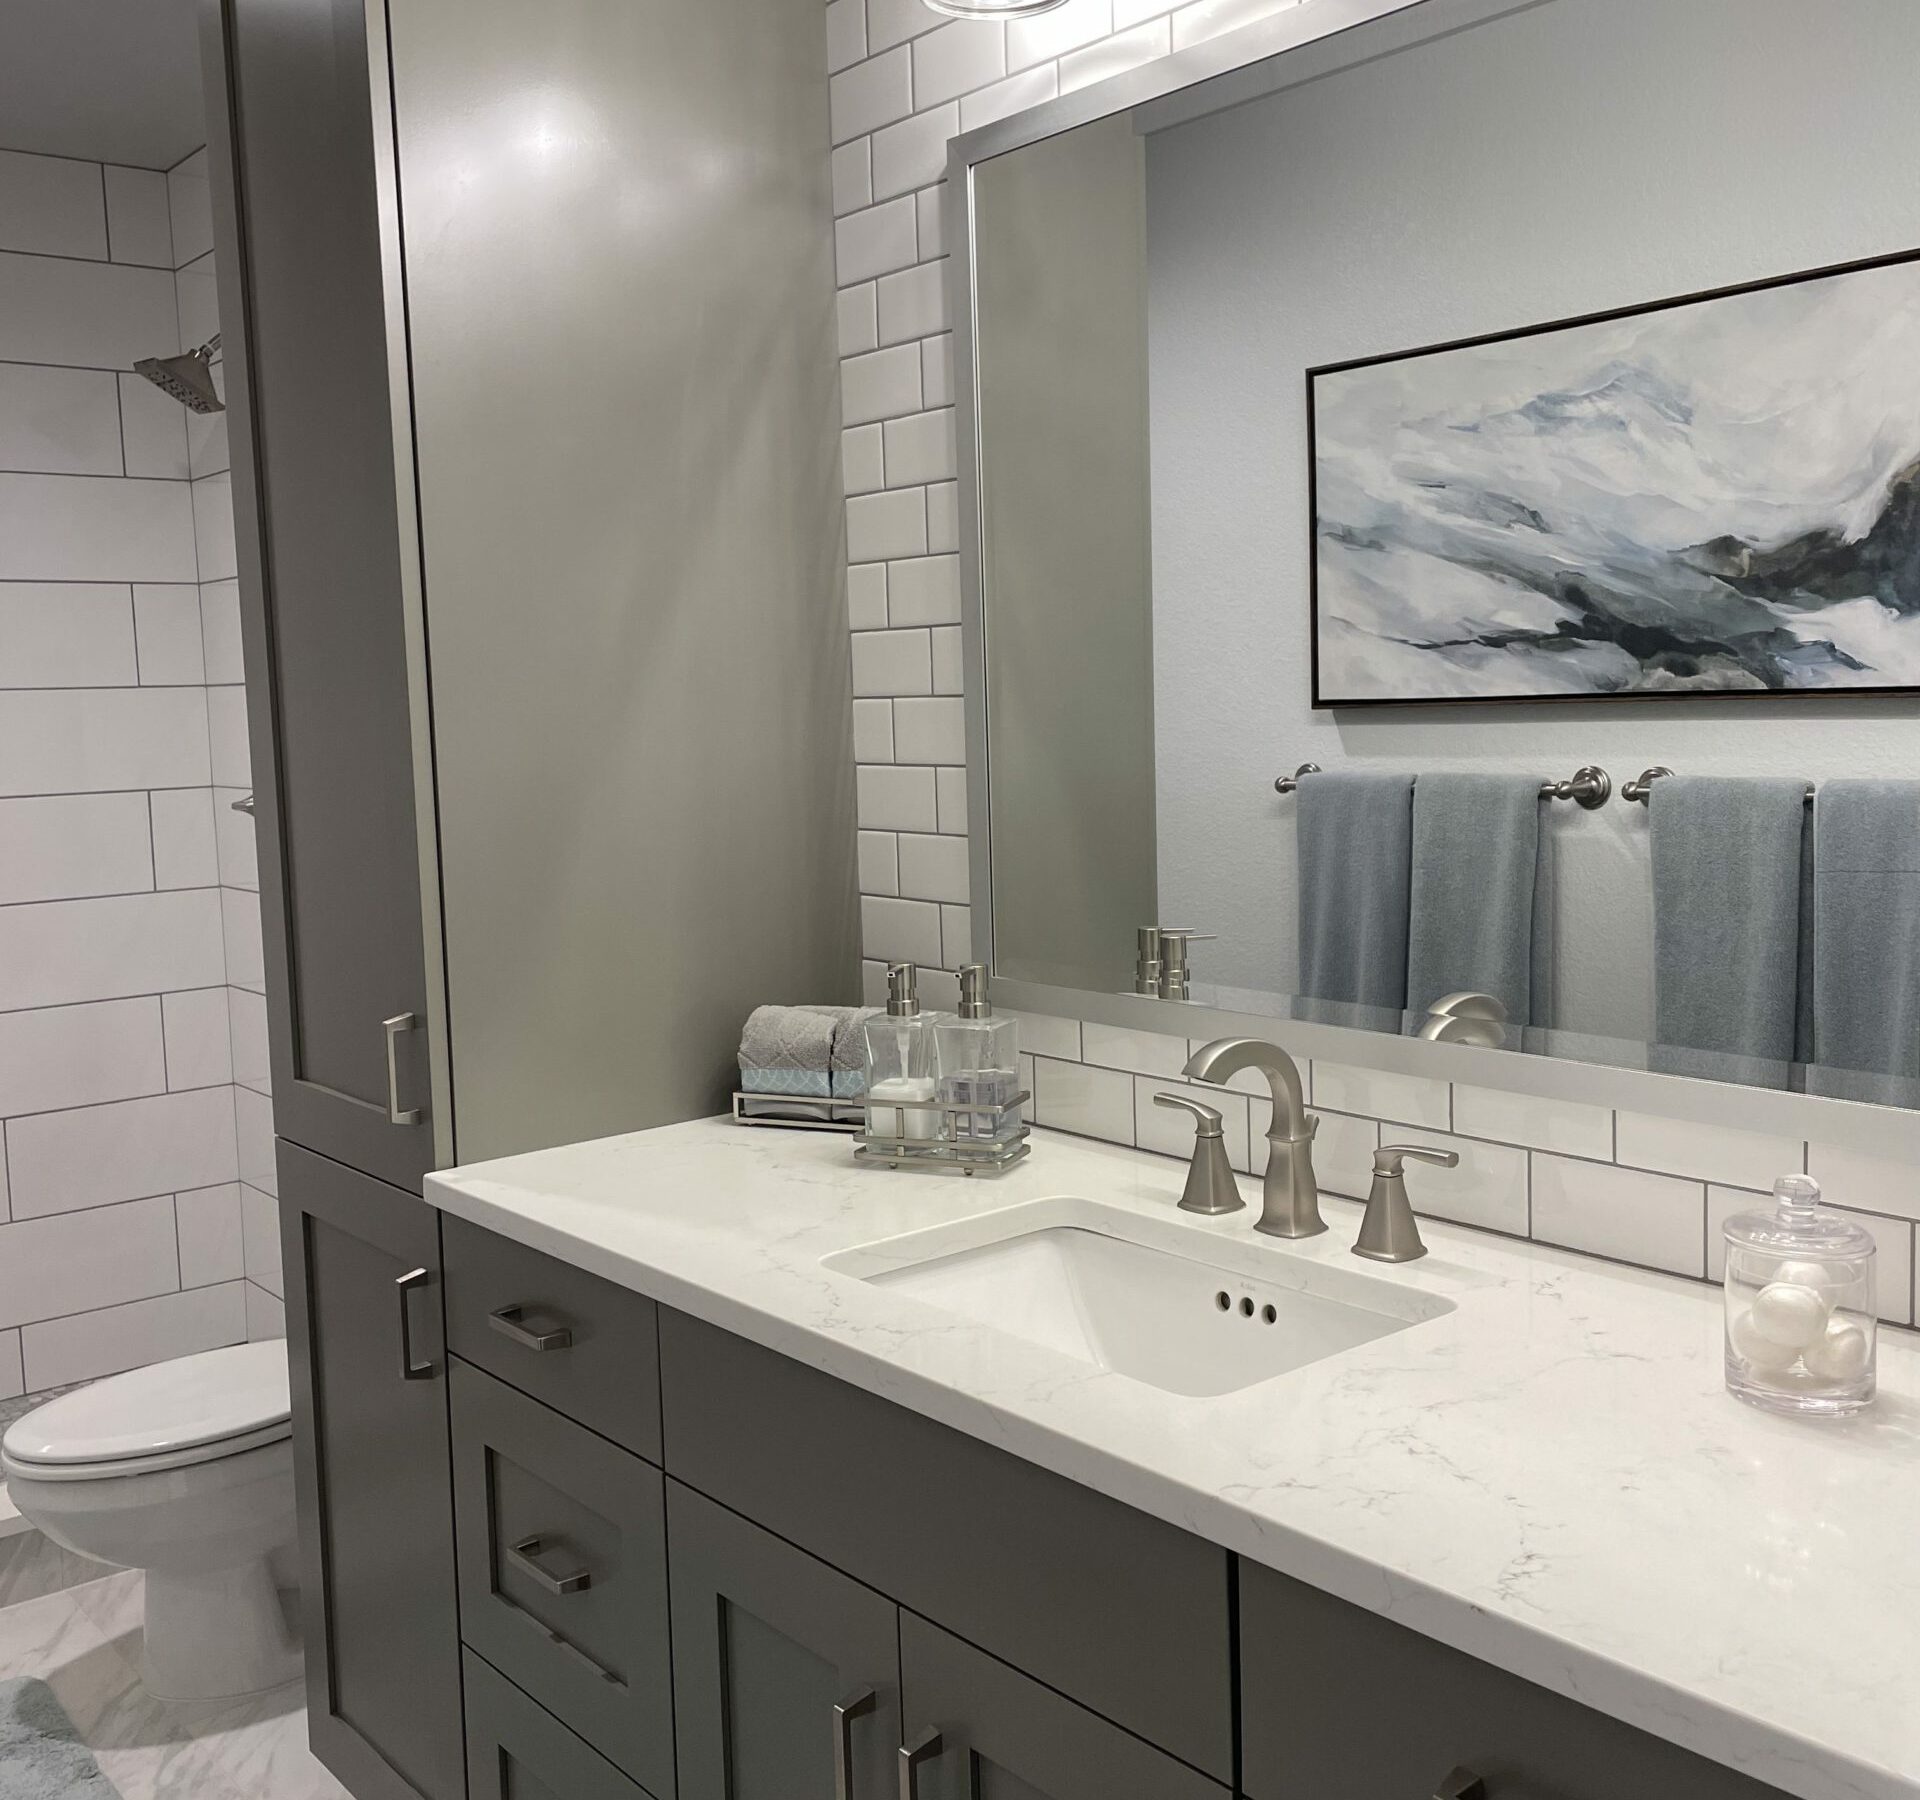 New bathroom remodeling and cabinets in Longmont